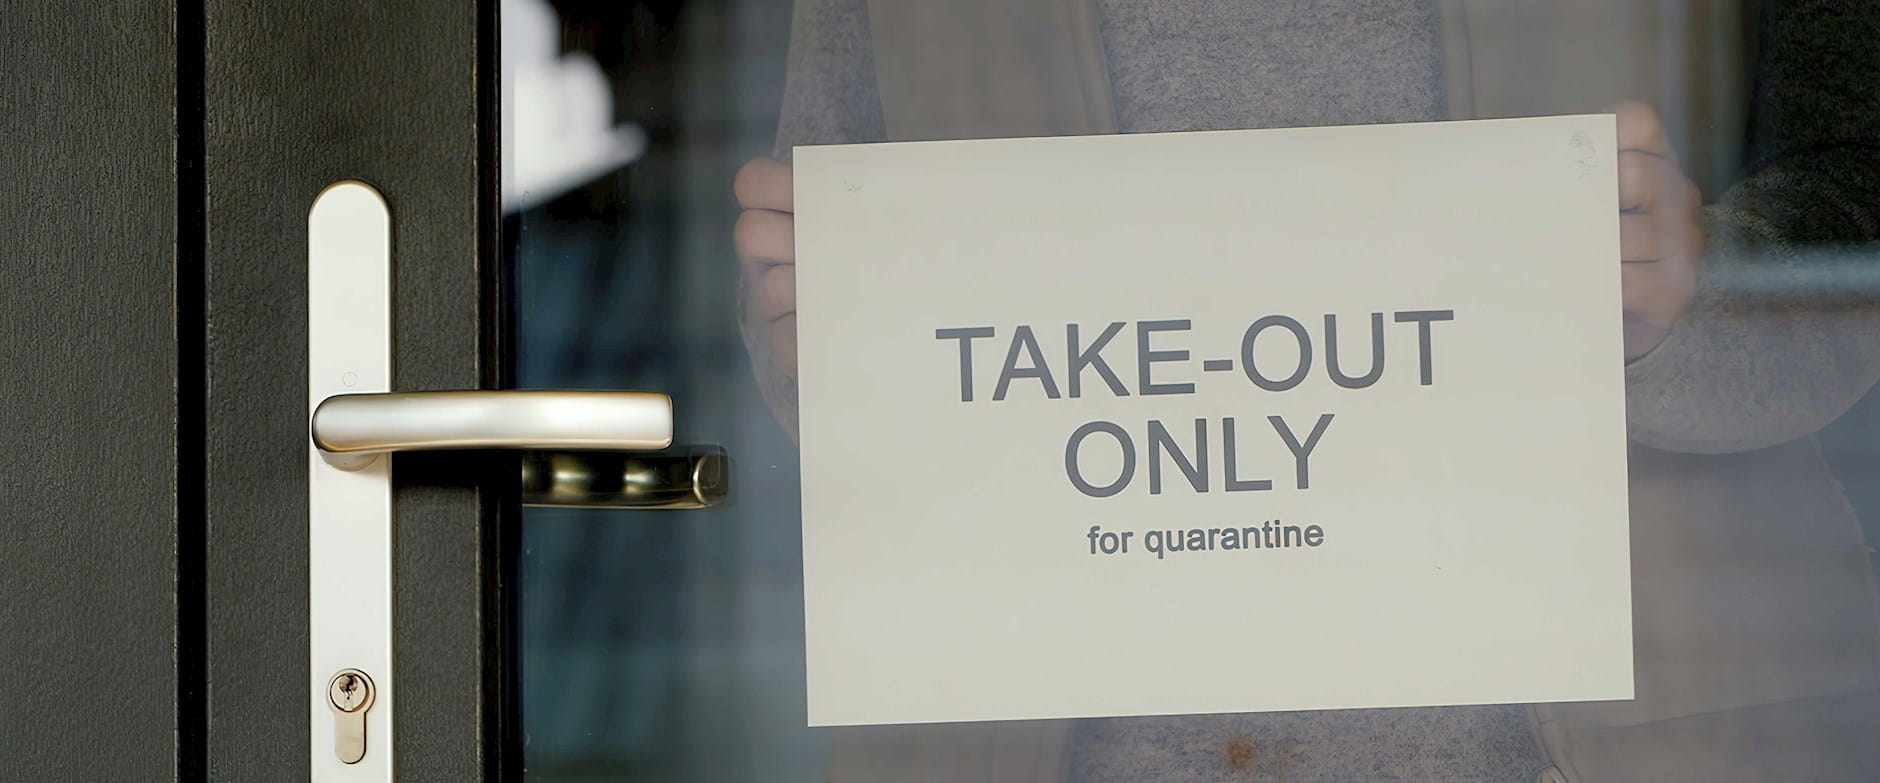 Takeout only sign